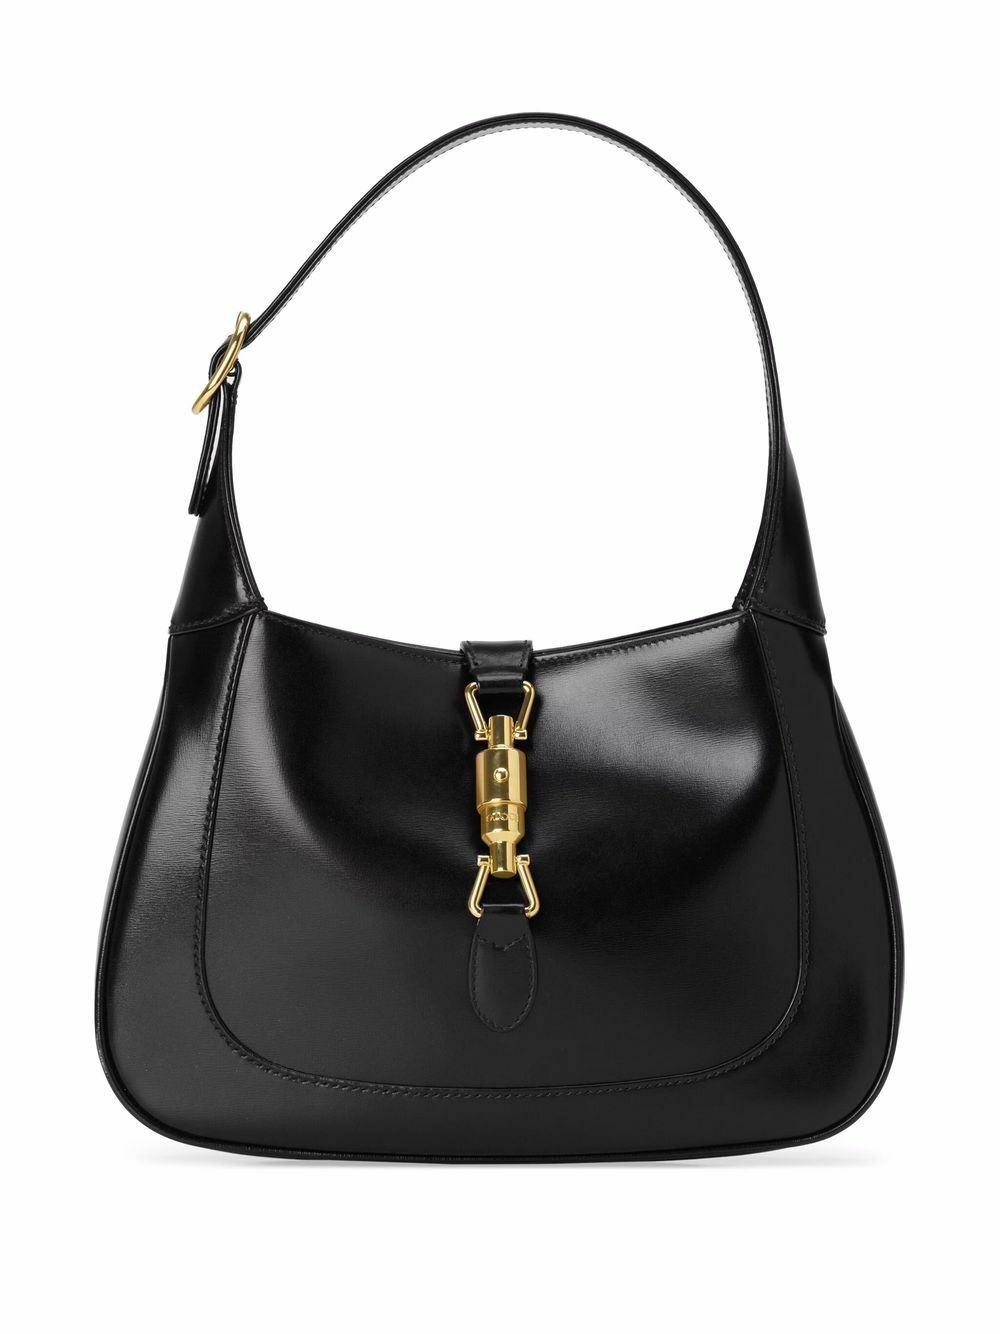 GUCCI - Jackie Small Leather Shoulder Bag Gucci